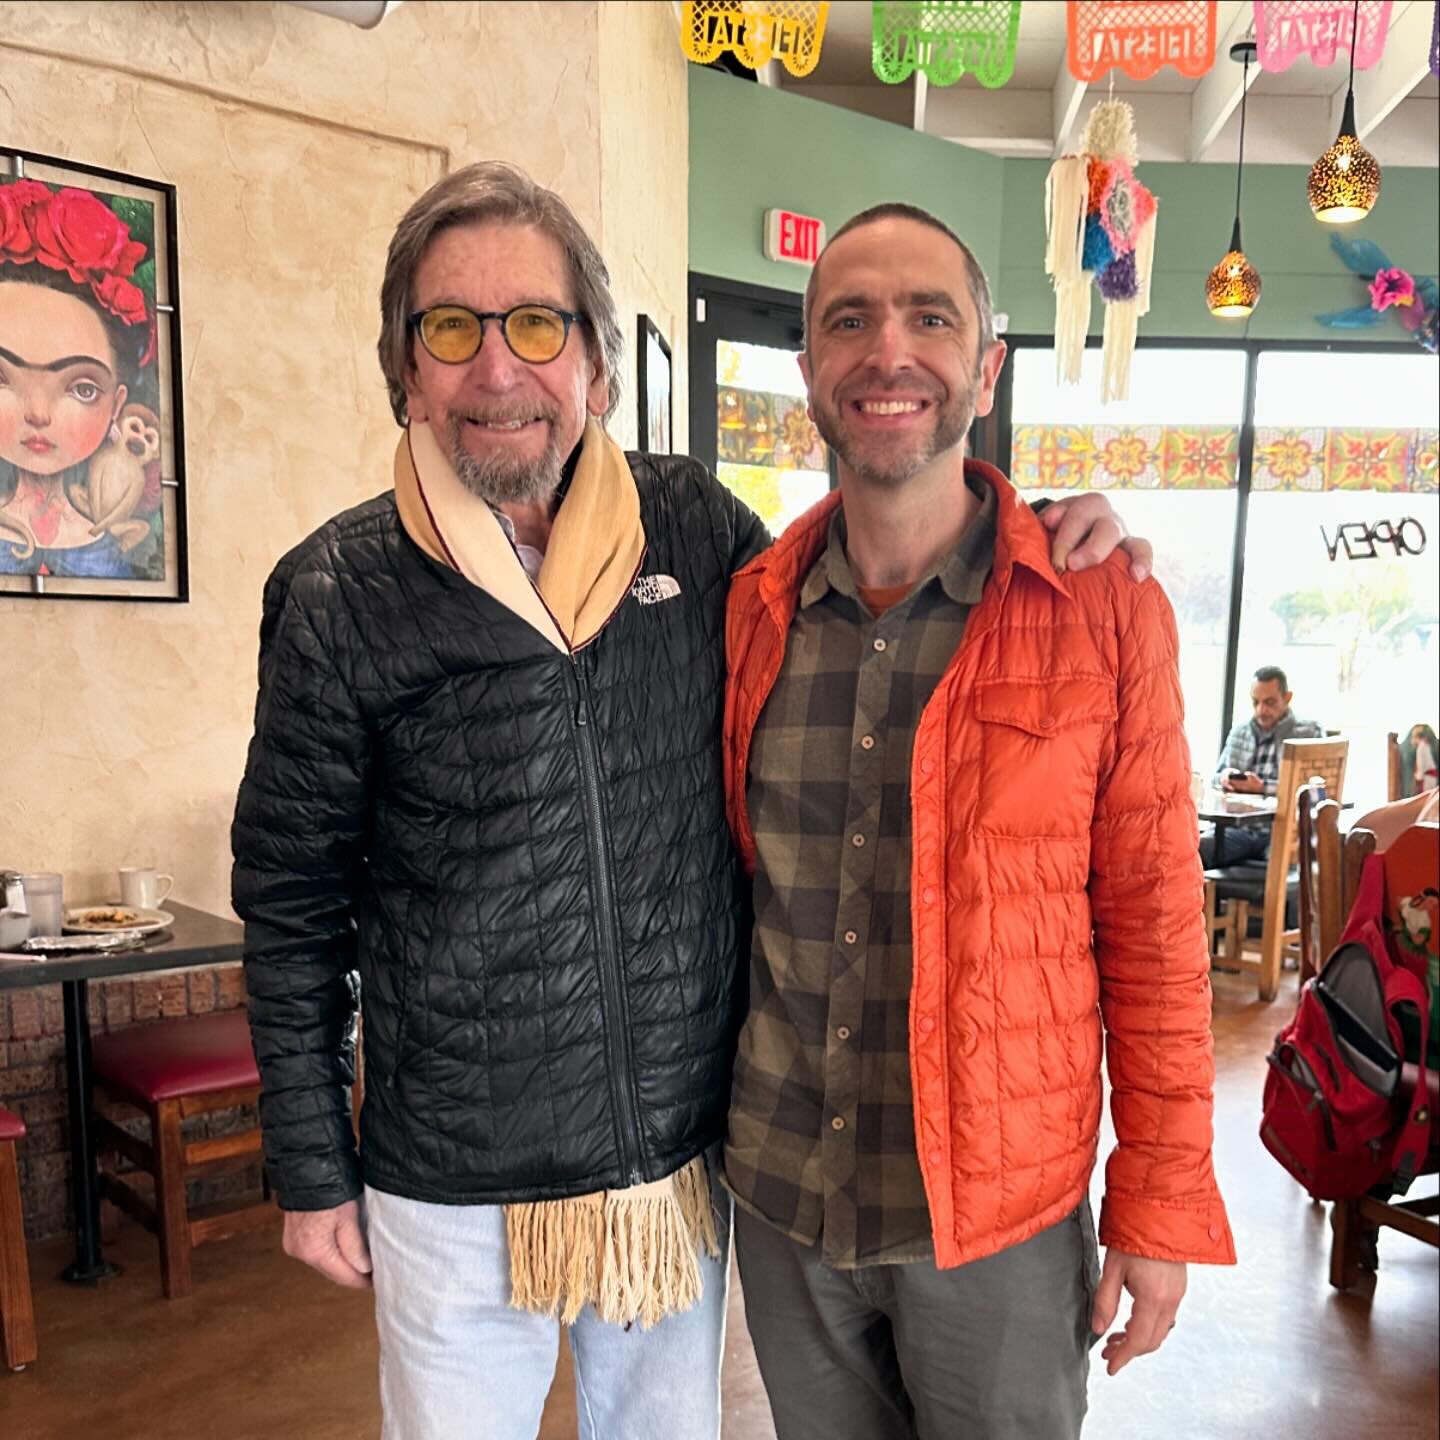 I caught up with my dear friend @mogasart on a recent trip to San Antonio, TX. In addition to being an incredible architect, he&rsquo;s a talented artist and compassionate educator, and I&rsquo;m so fortunate to have worked under his mentorship. 

On